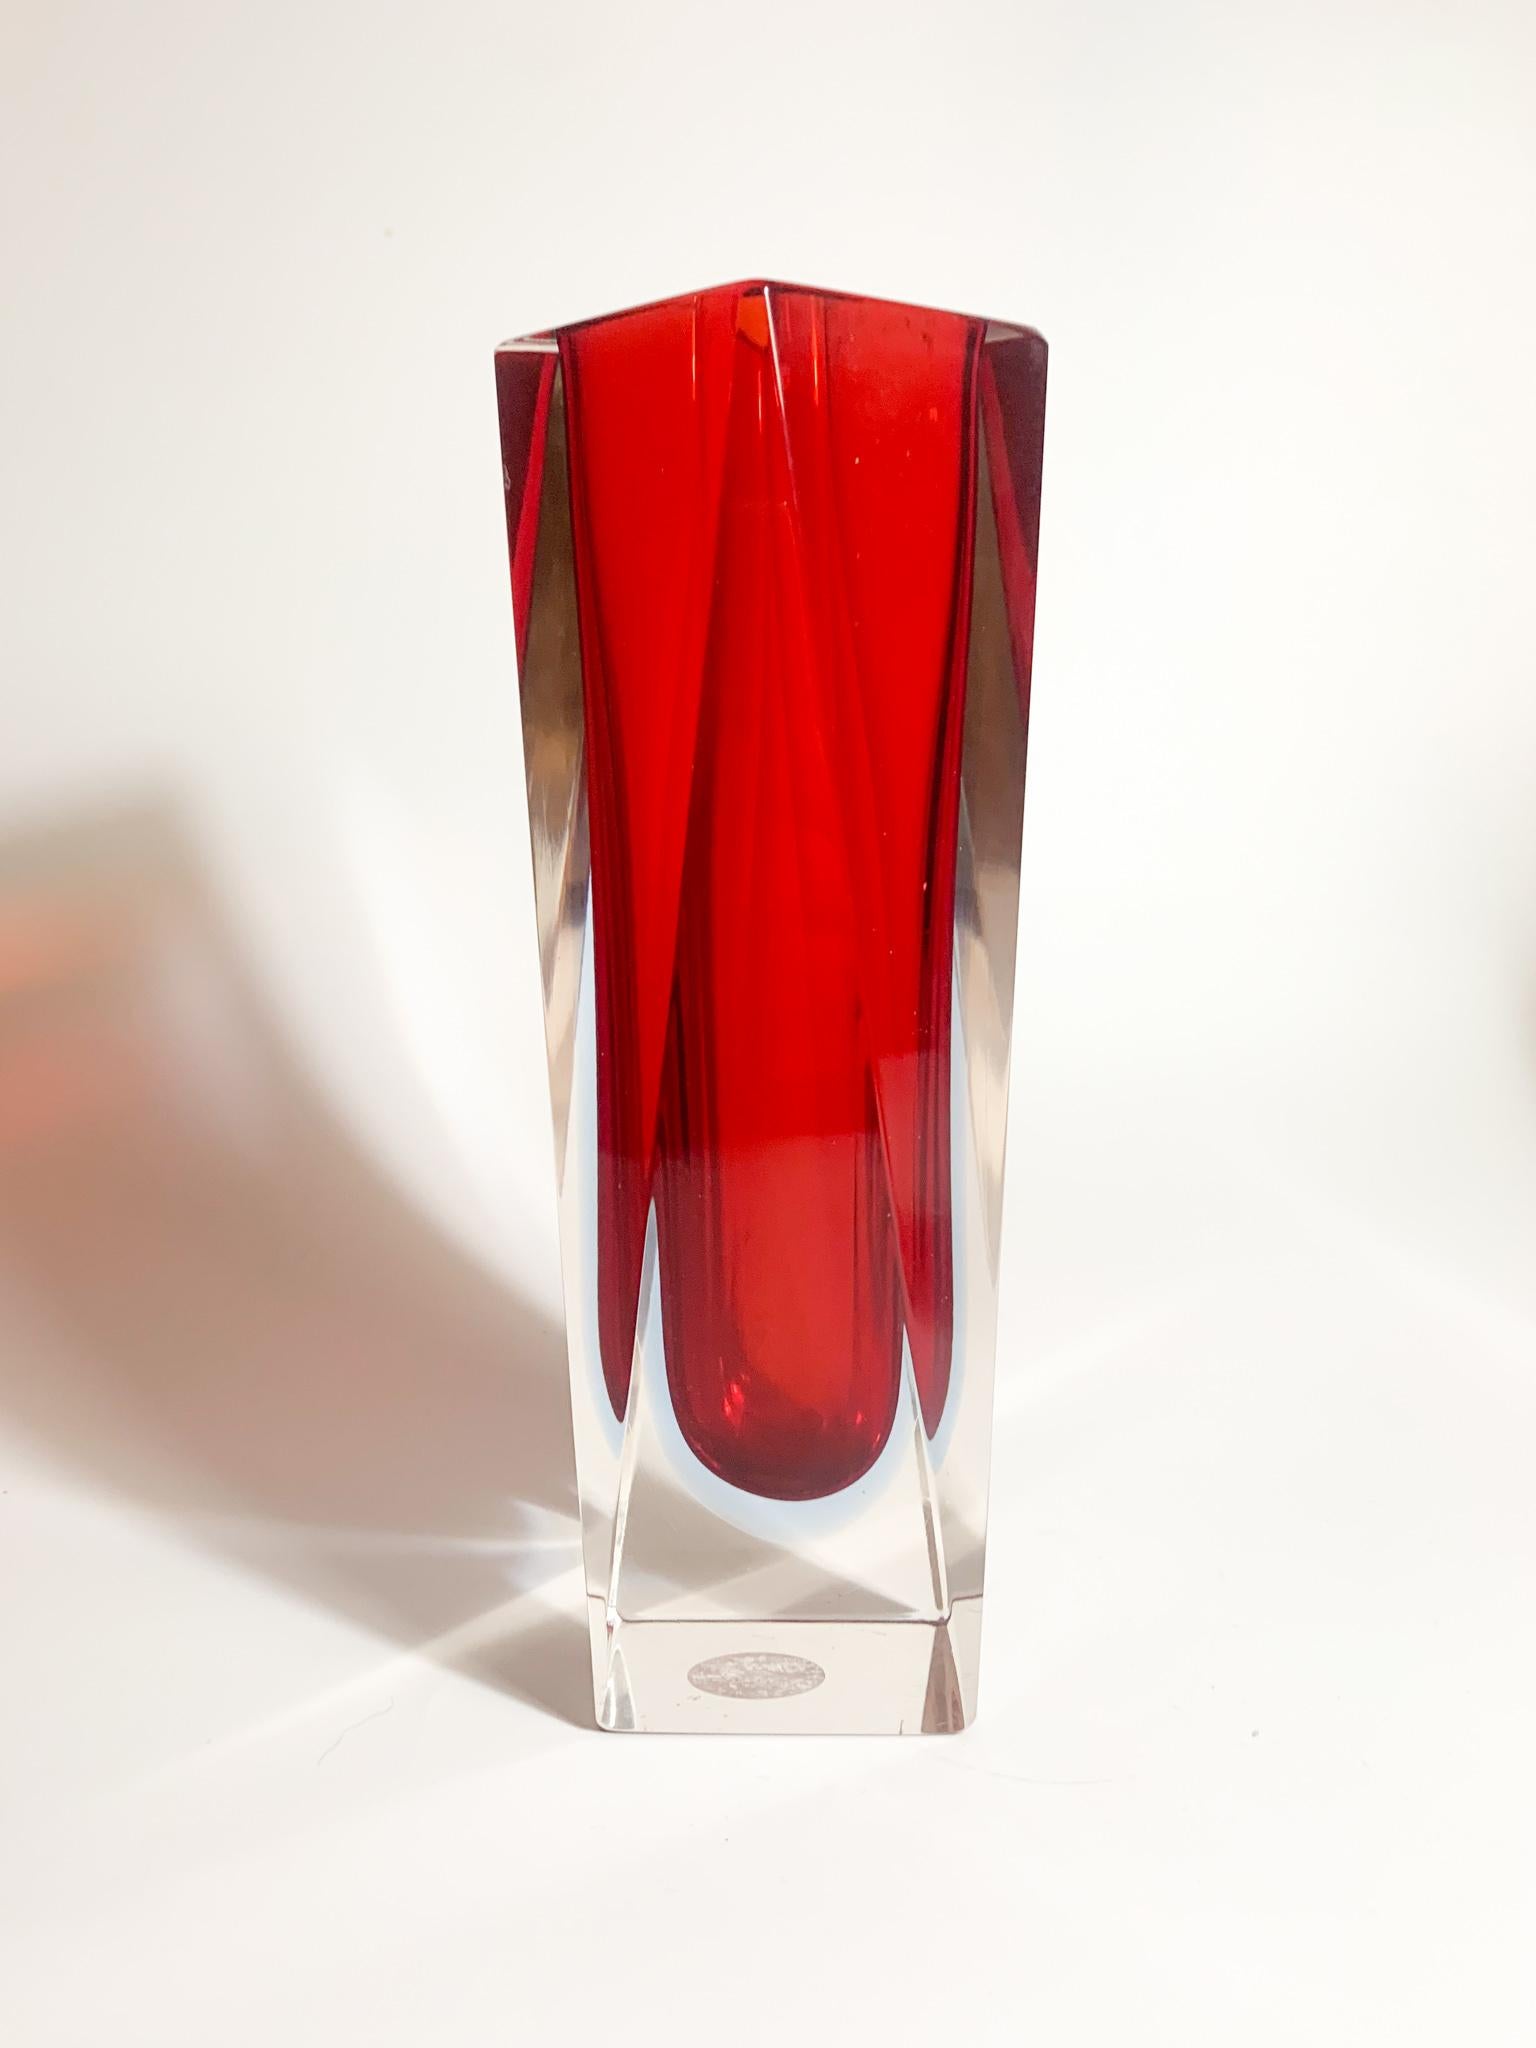 Vase of geometric shape in red and blue Murano glass, whose creation is attributed to Flavio Poli in the 1970s

Ø 8 cm, h 20 cm

Flavio Poli was born in 1900 in Chioggia and is known for being a great Italian ceramist, draftsman and painter.